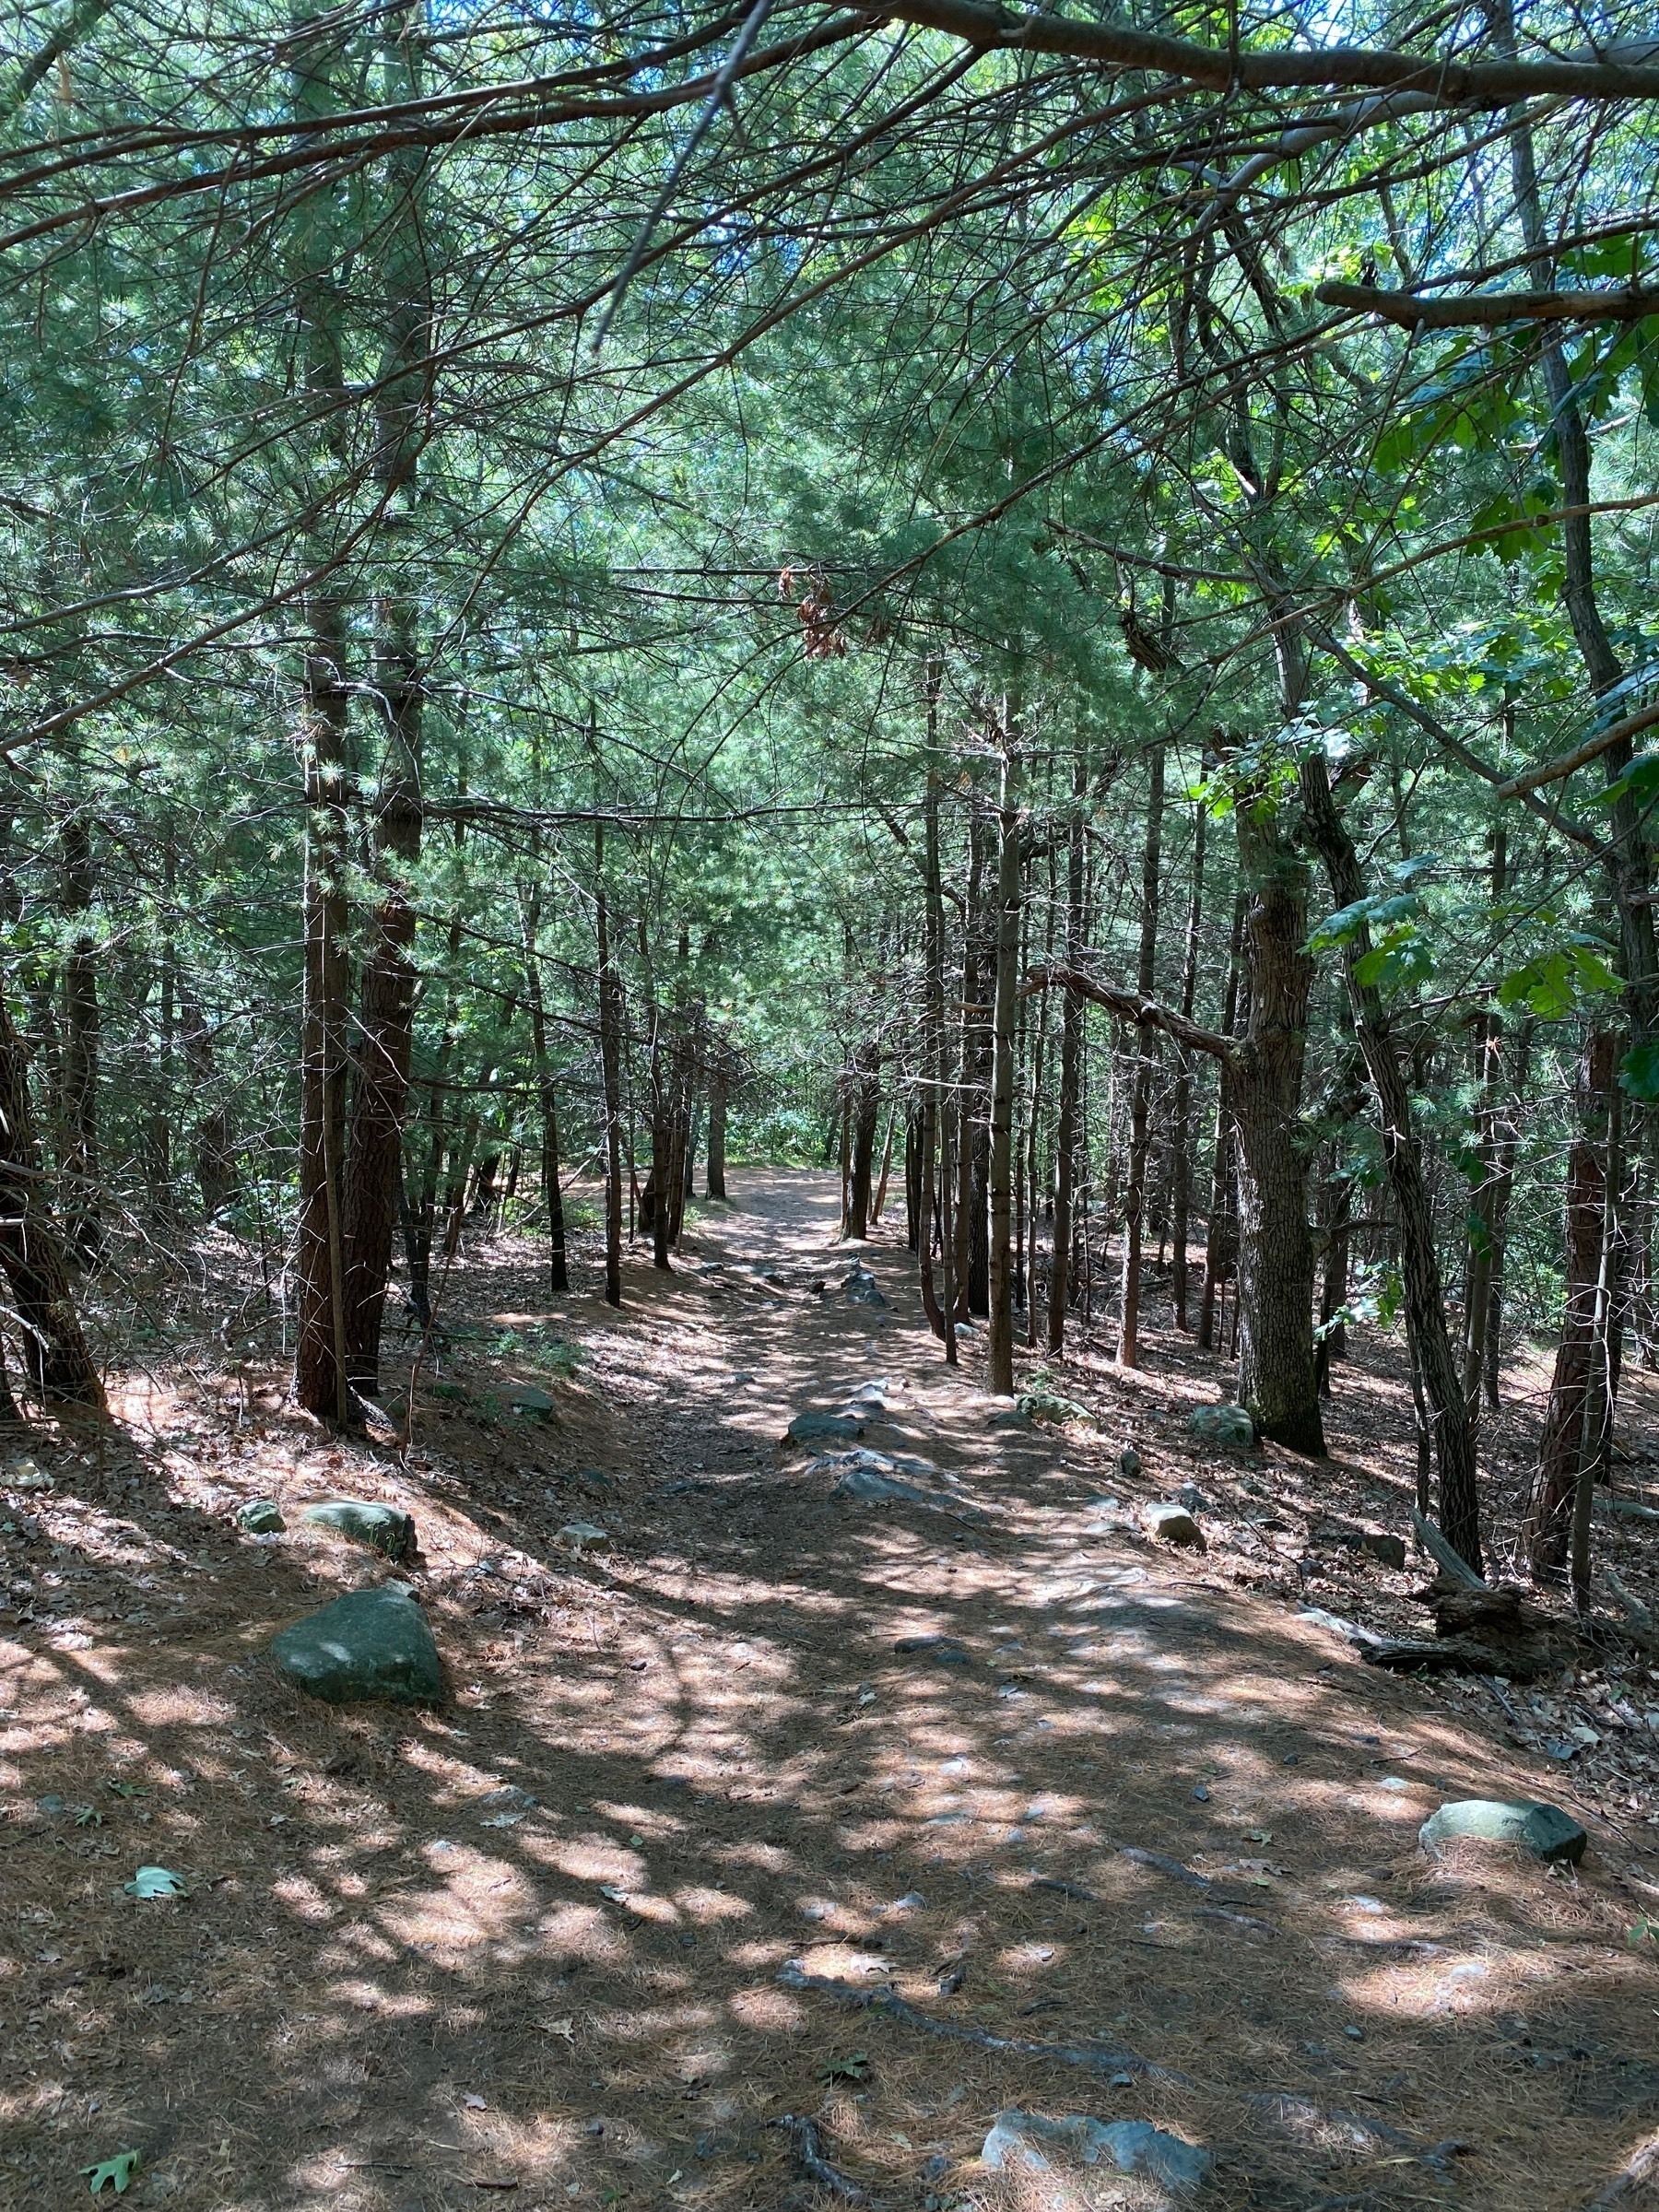 View of a path running down a hill between sunlit trees.